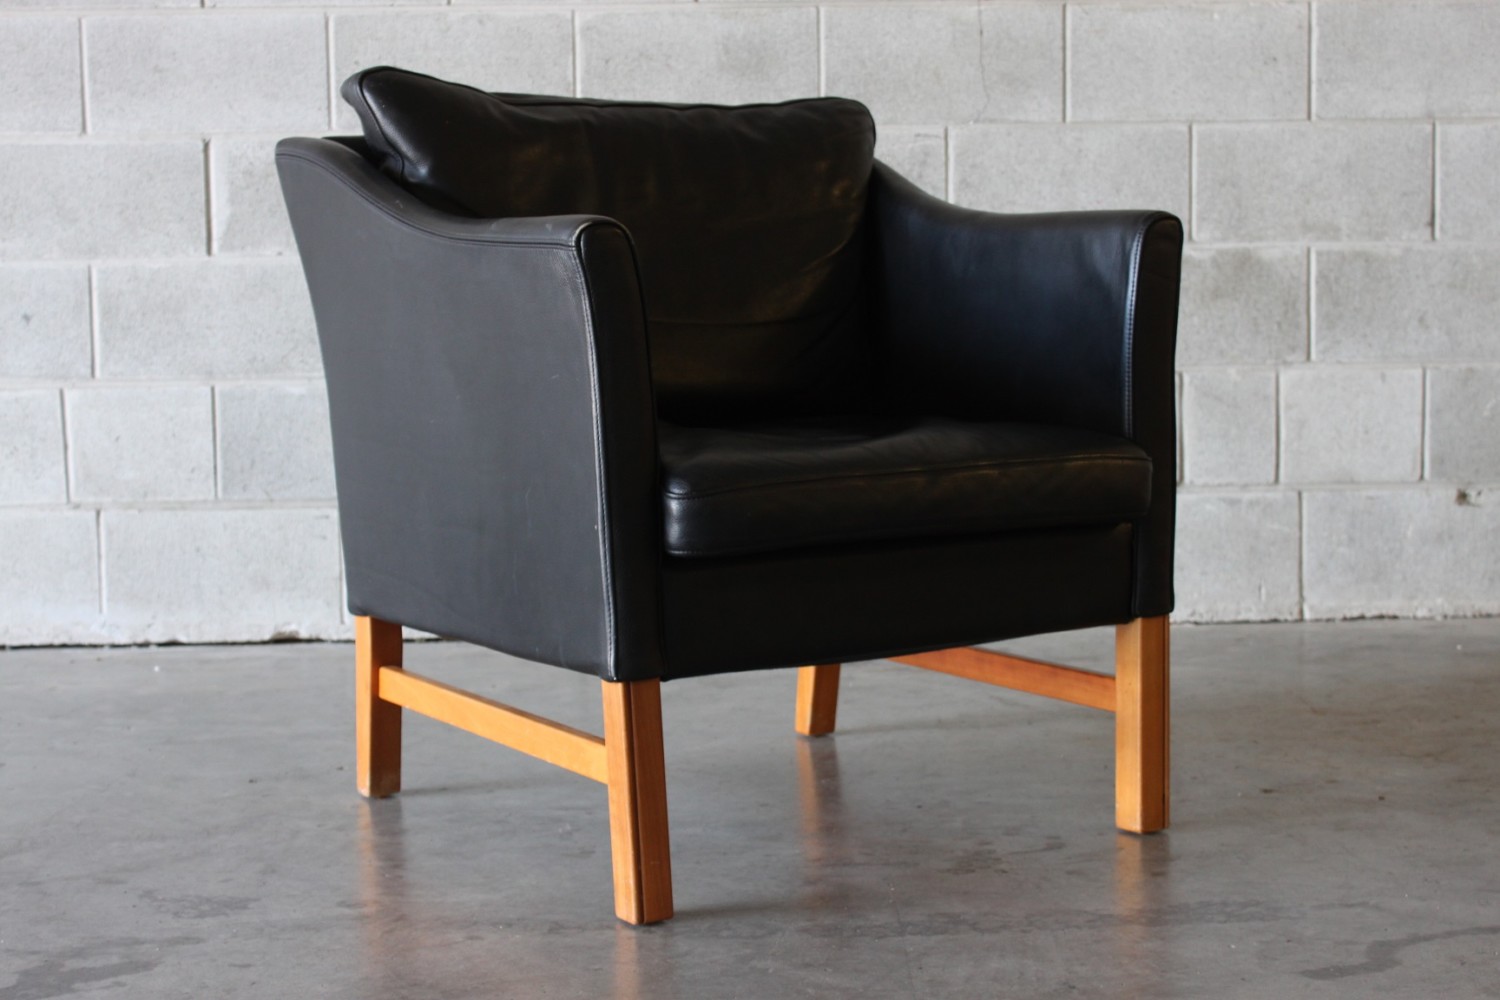 Pair of Black Leather Armchairs